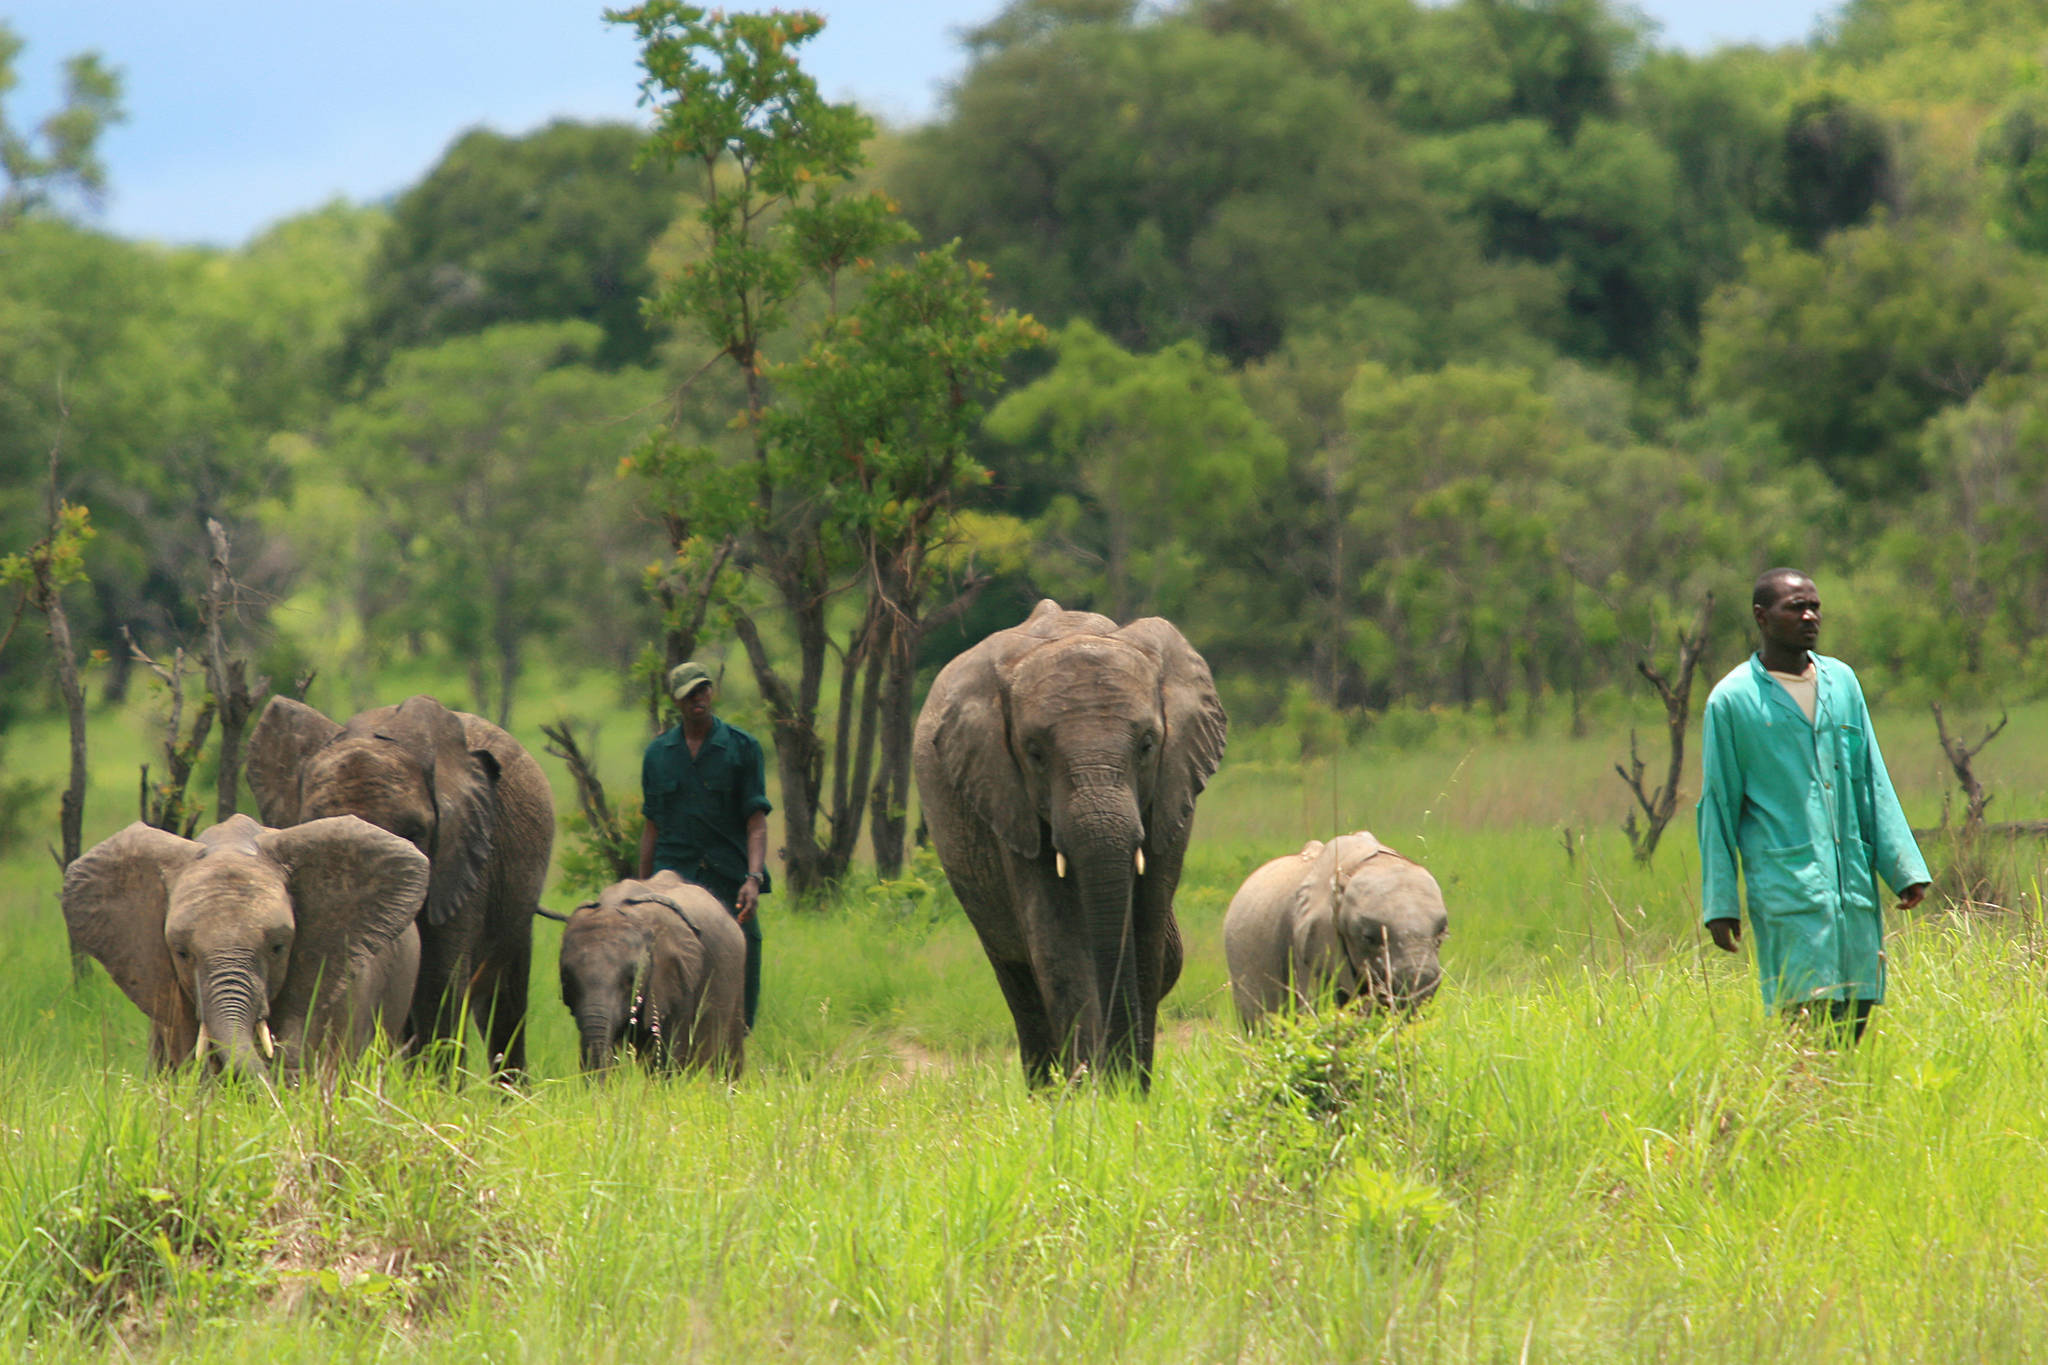 The herd of elephants walk with their keepers out in the Kafue National Park in Zambia. Photo courtesy of Kelly Bakos.